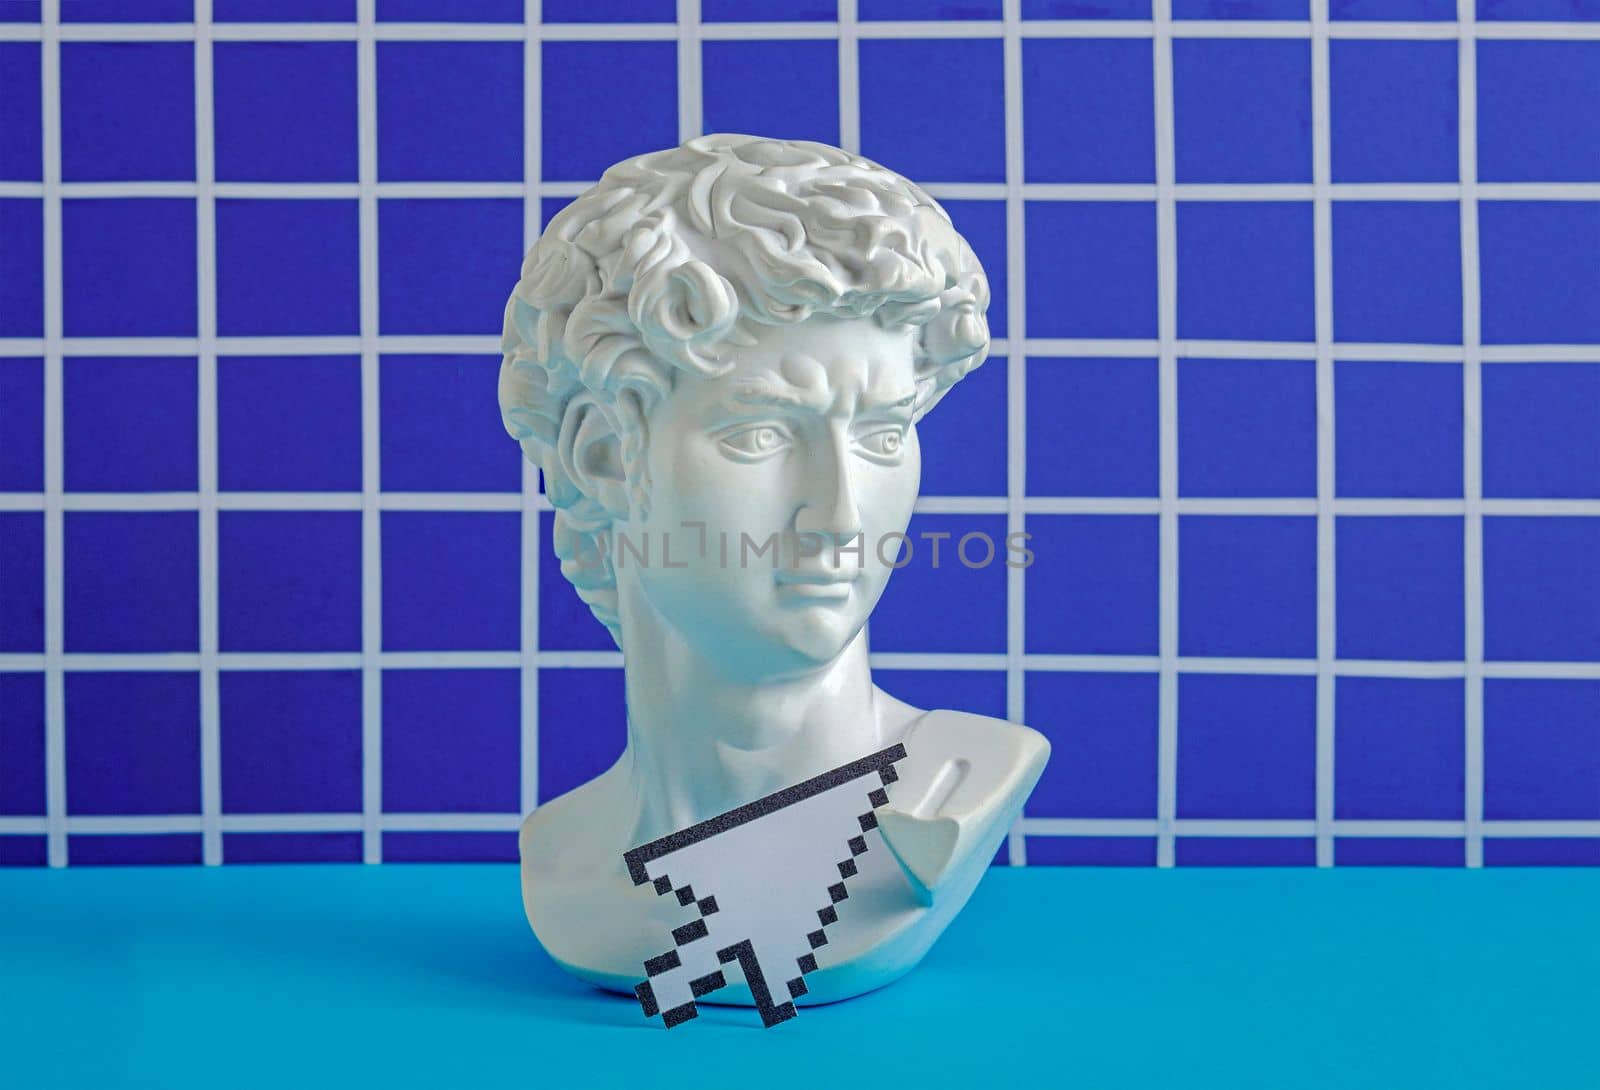 David statue head and arrow pixel mouse pointer interface. Minimal concept of NFT technologies of the future cyberpunk and vaporwave crypto technologies. High quality photo